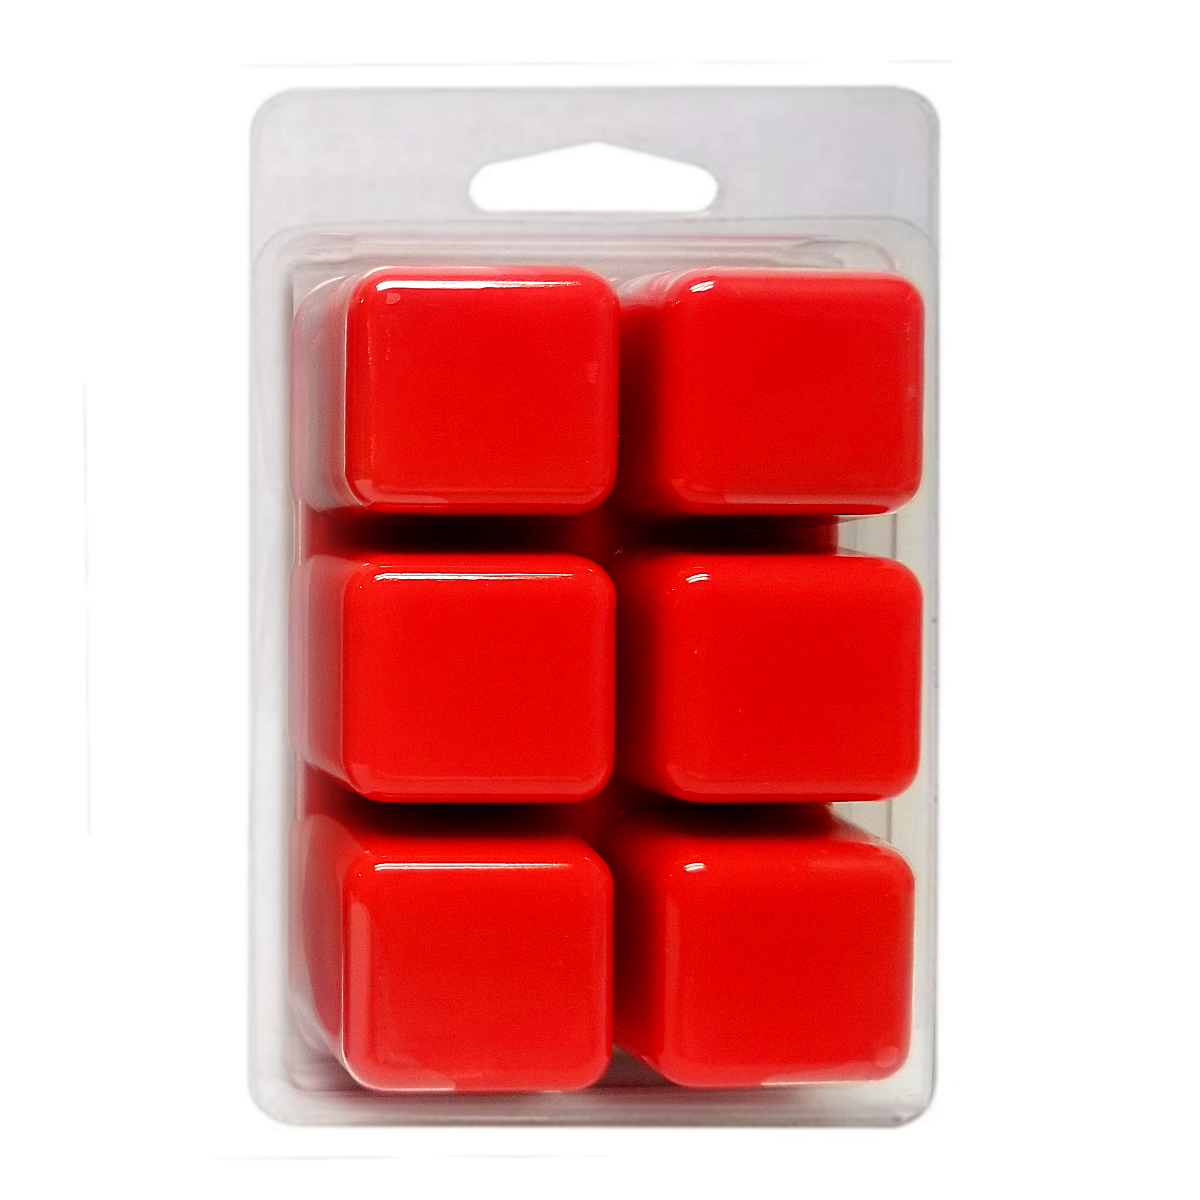 Watermelon Punch - 3.2 oz Clamshell